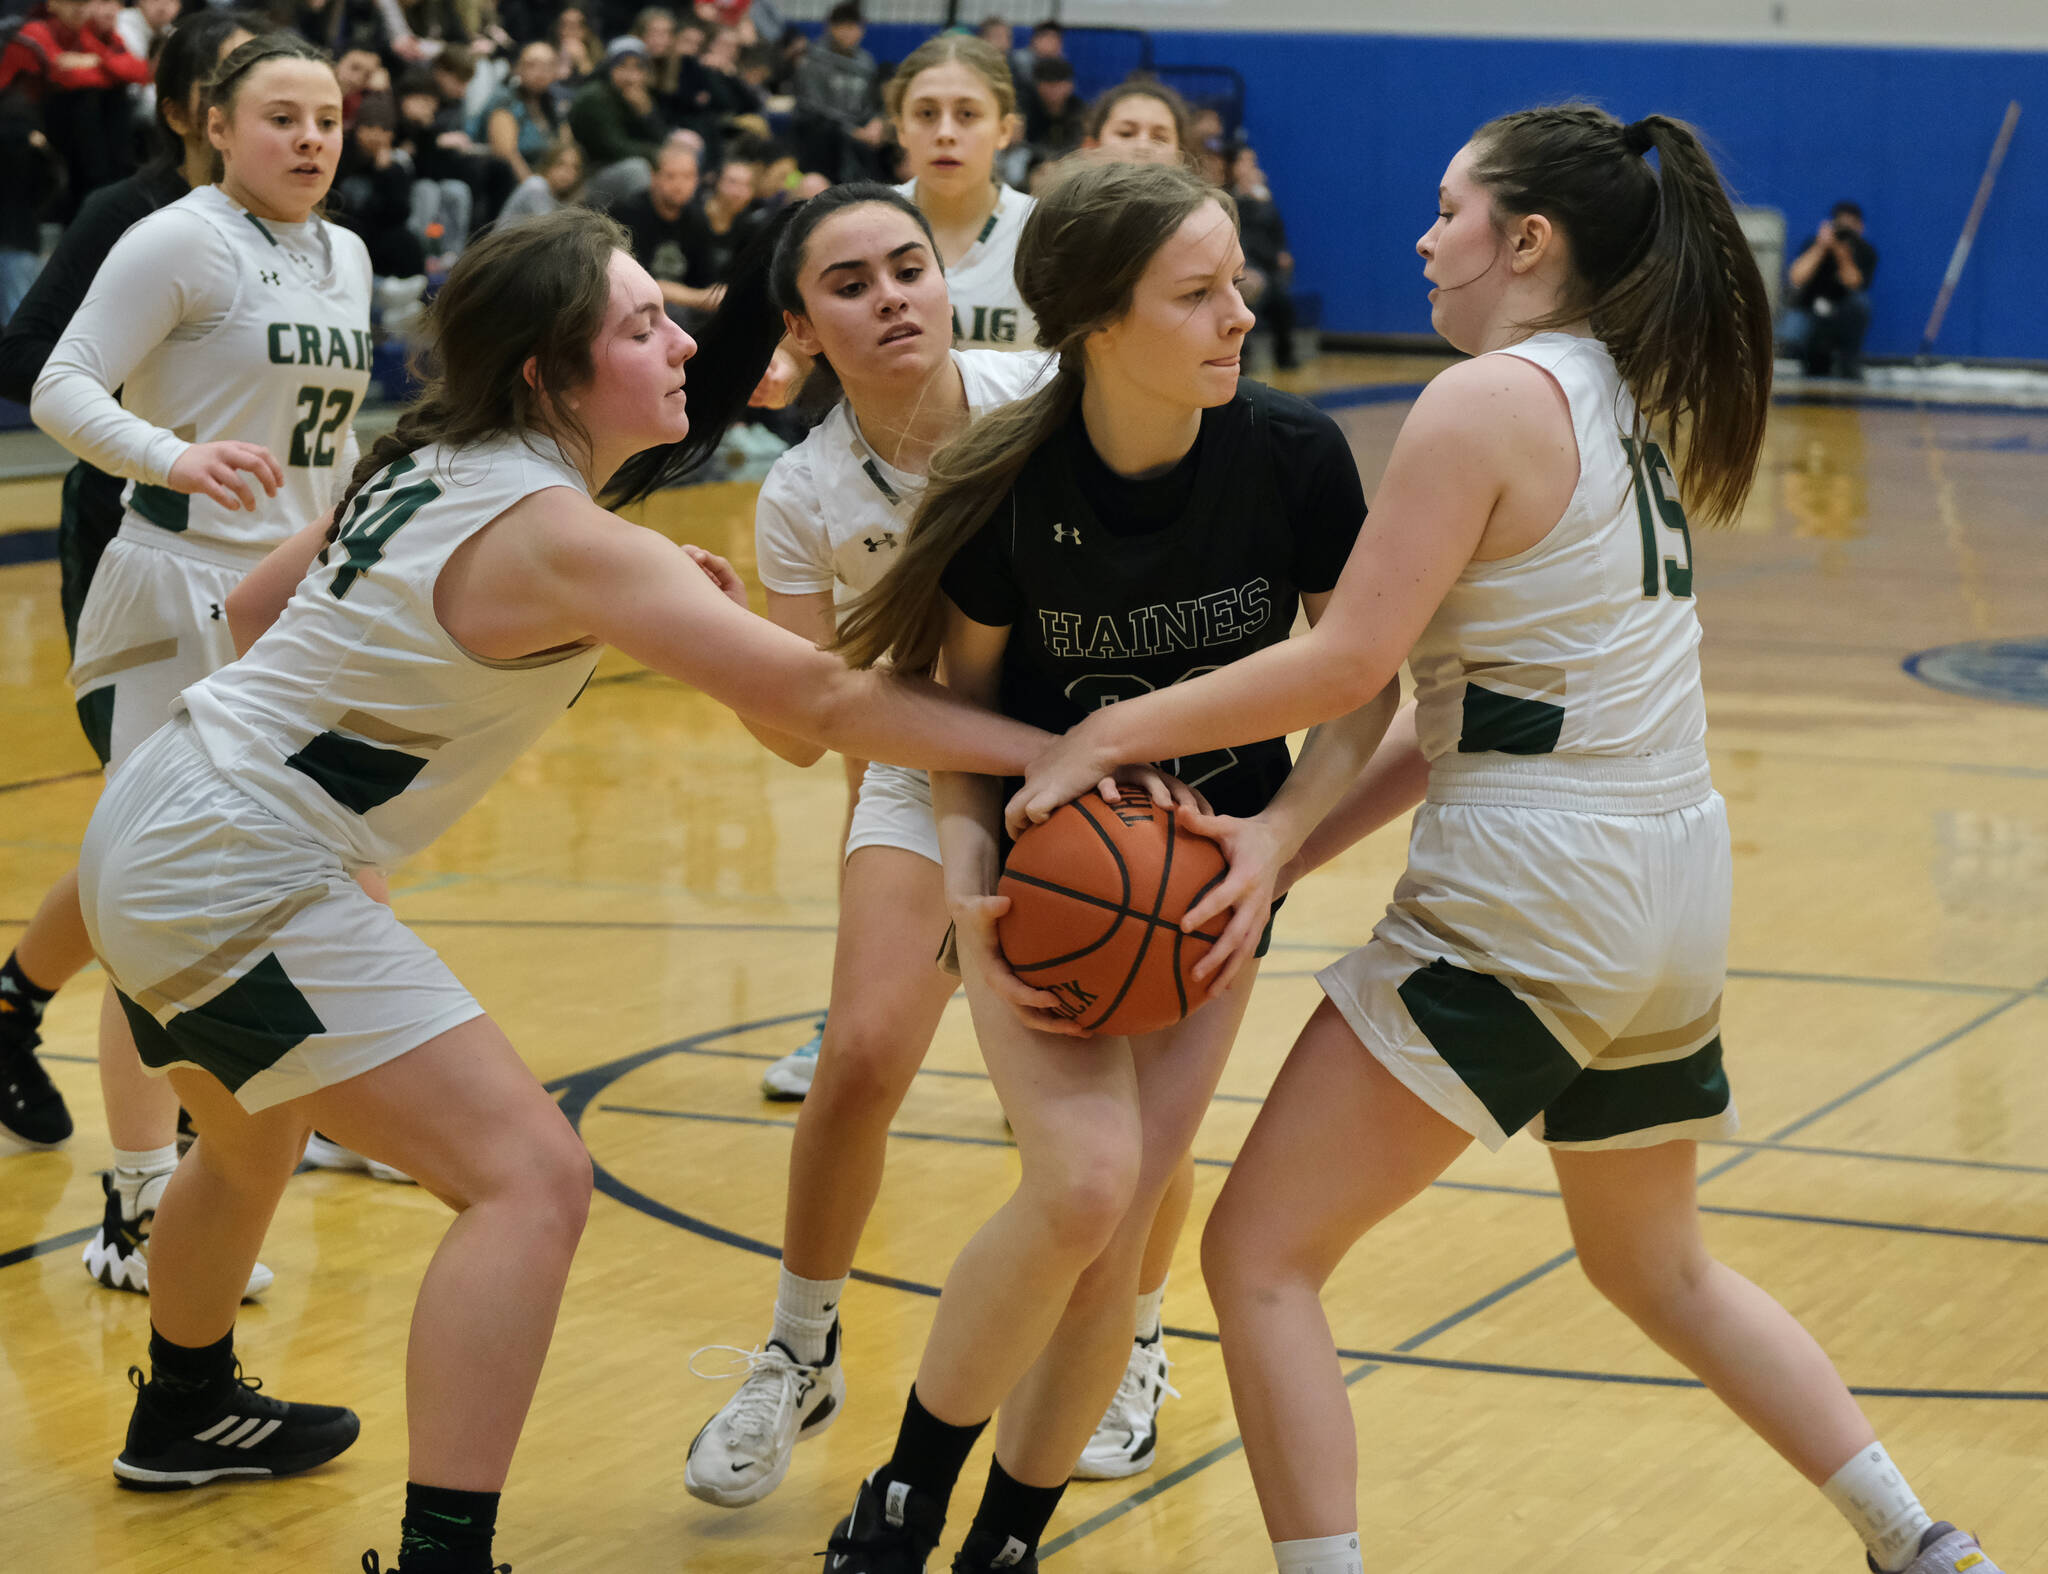 Haines’ Ashlyn Ganey (32) battles for a ball with Craig’s Alissa Durgan (14), Alexis Lawnicki and Amiaya Hansen (15) during Region V tournament action on Wednesday. (Klas Stolpe / For the Juneau Empire)